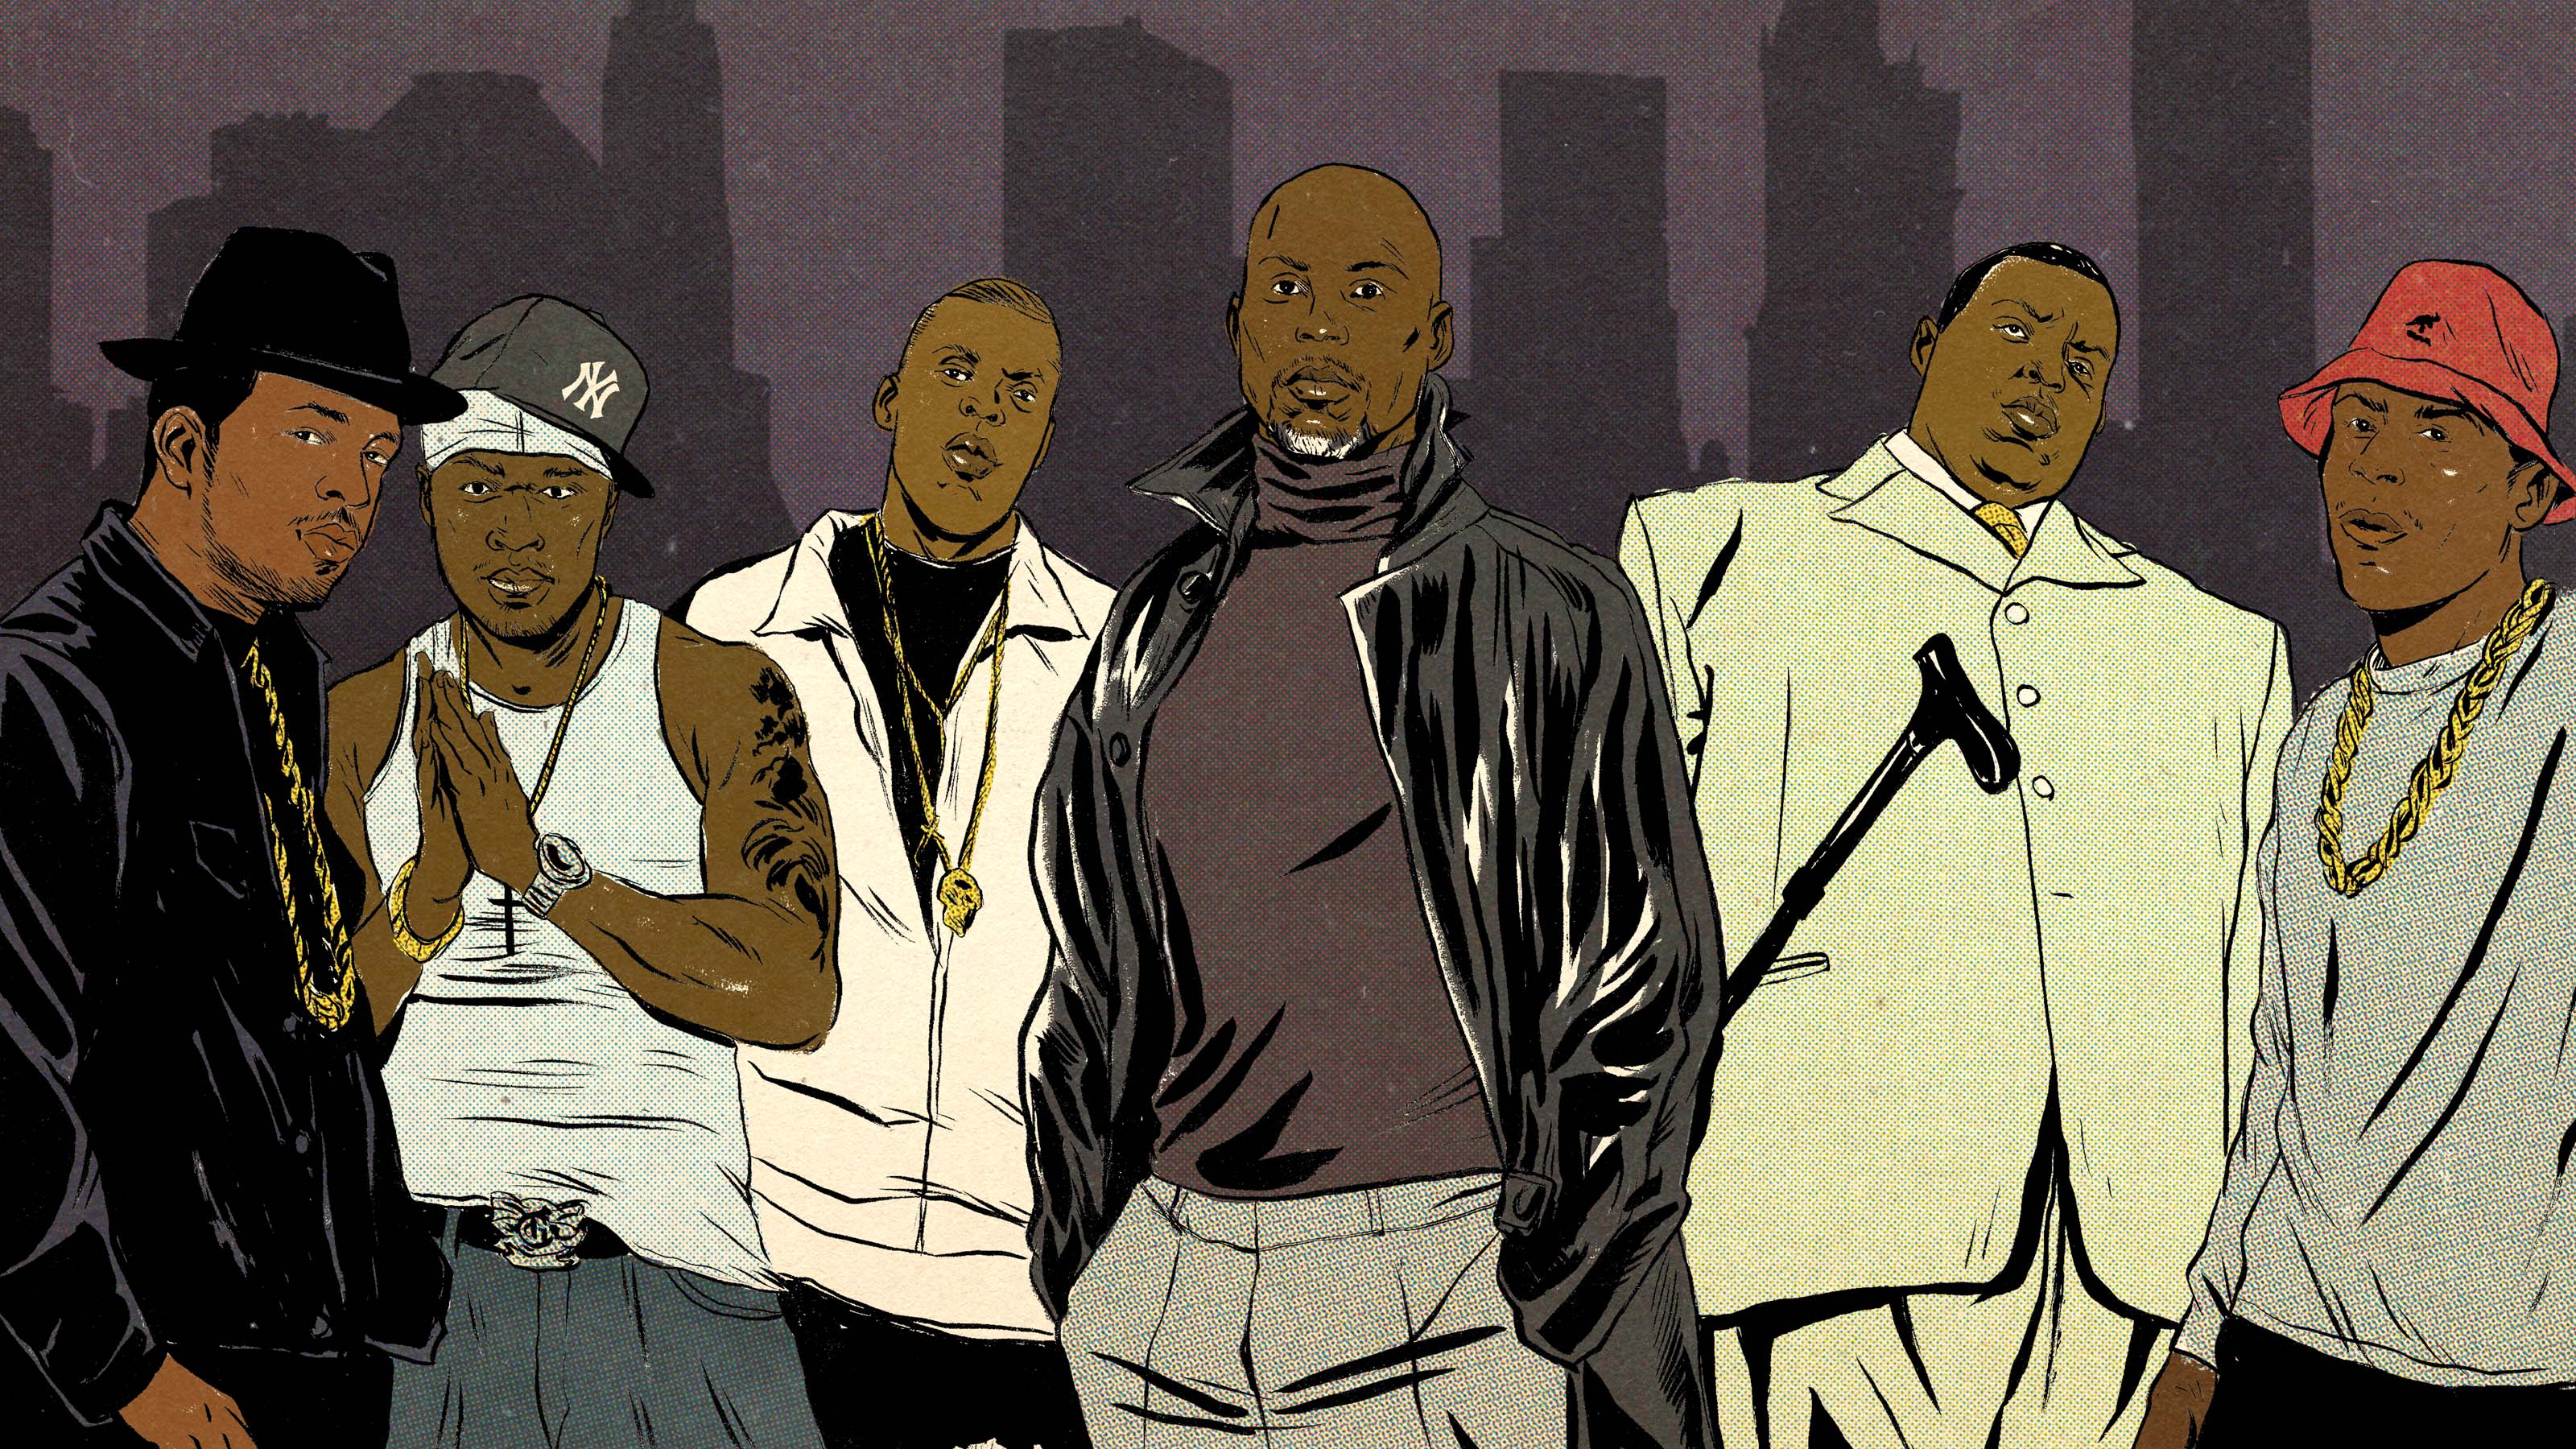 The Complete History of the Kings and Queens of New York Rap - The